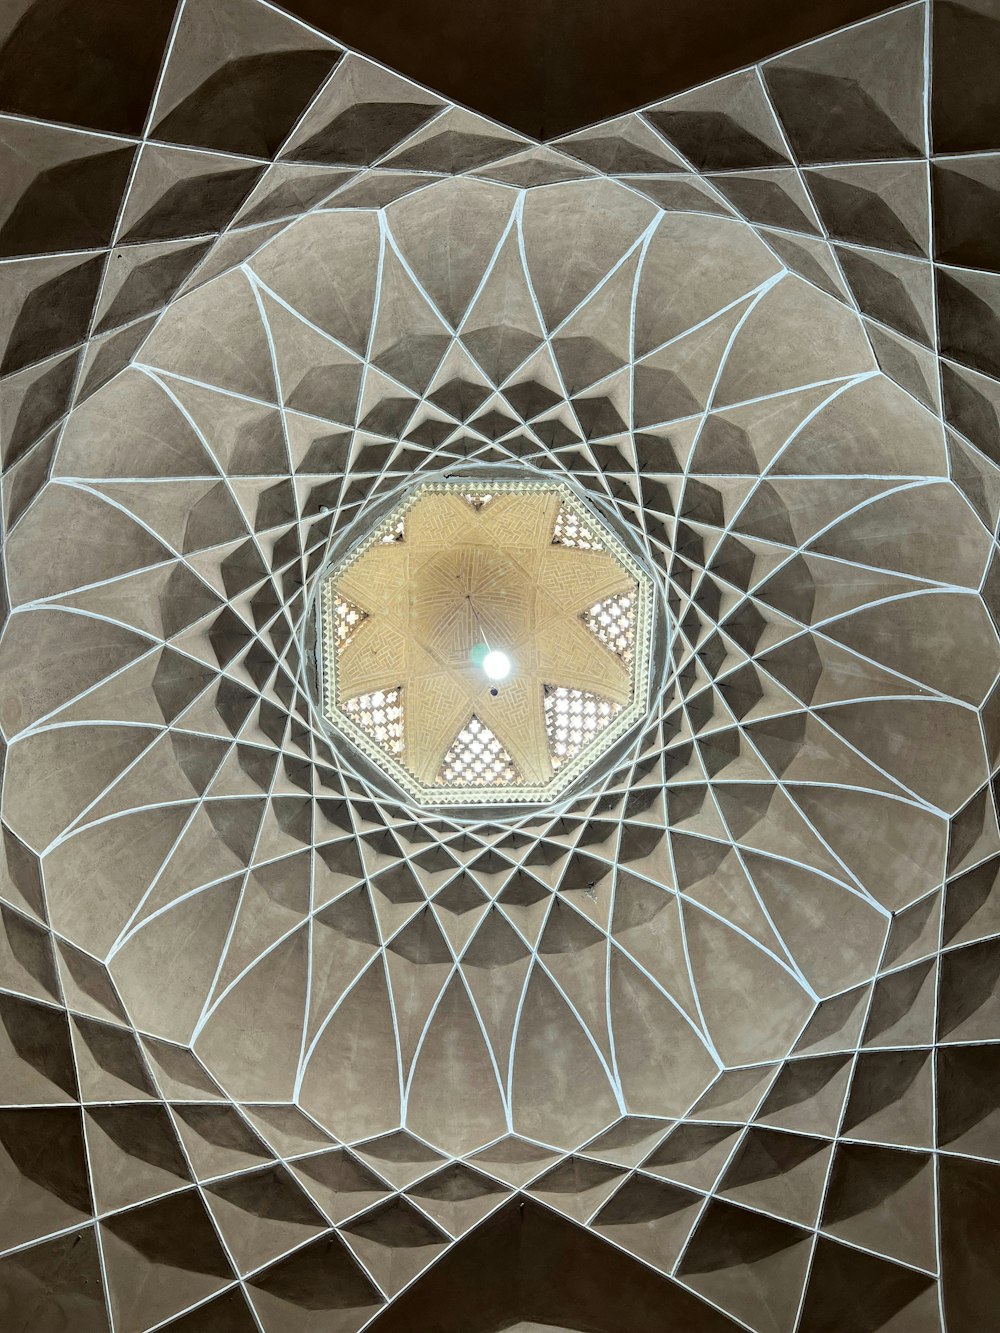 a very intricate design with a circular object in the center